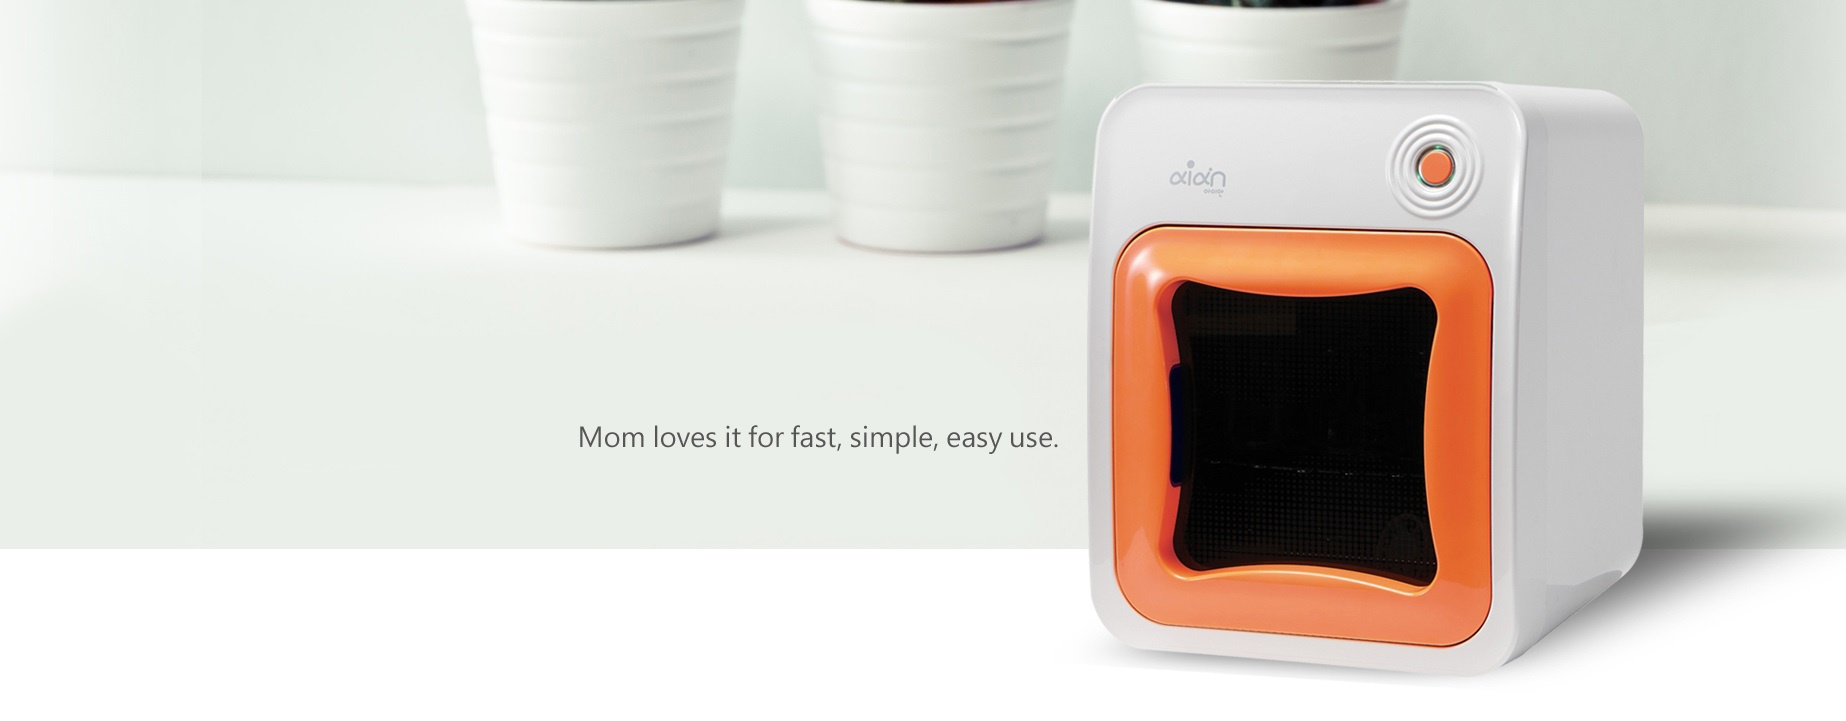 Aian Sterilizer & Dryer - Mom Loves it for fast, simple, easy use